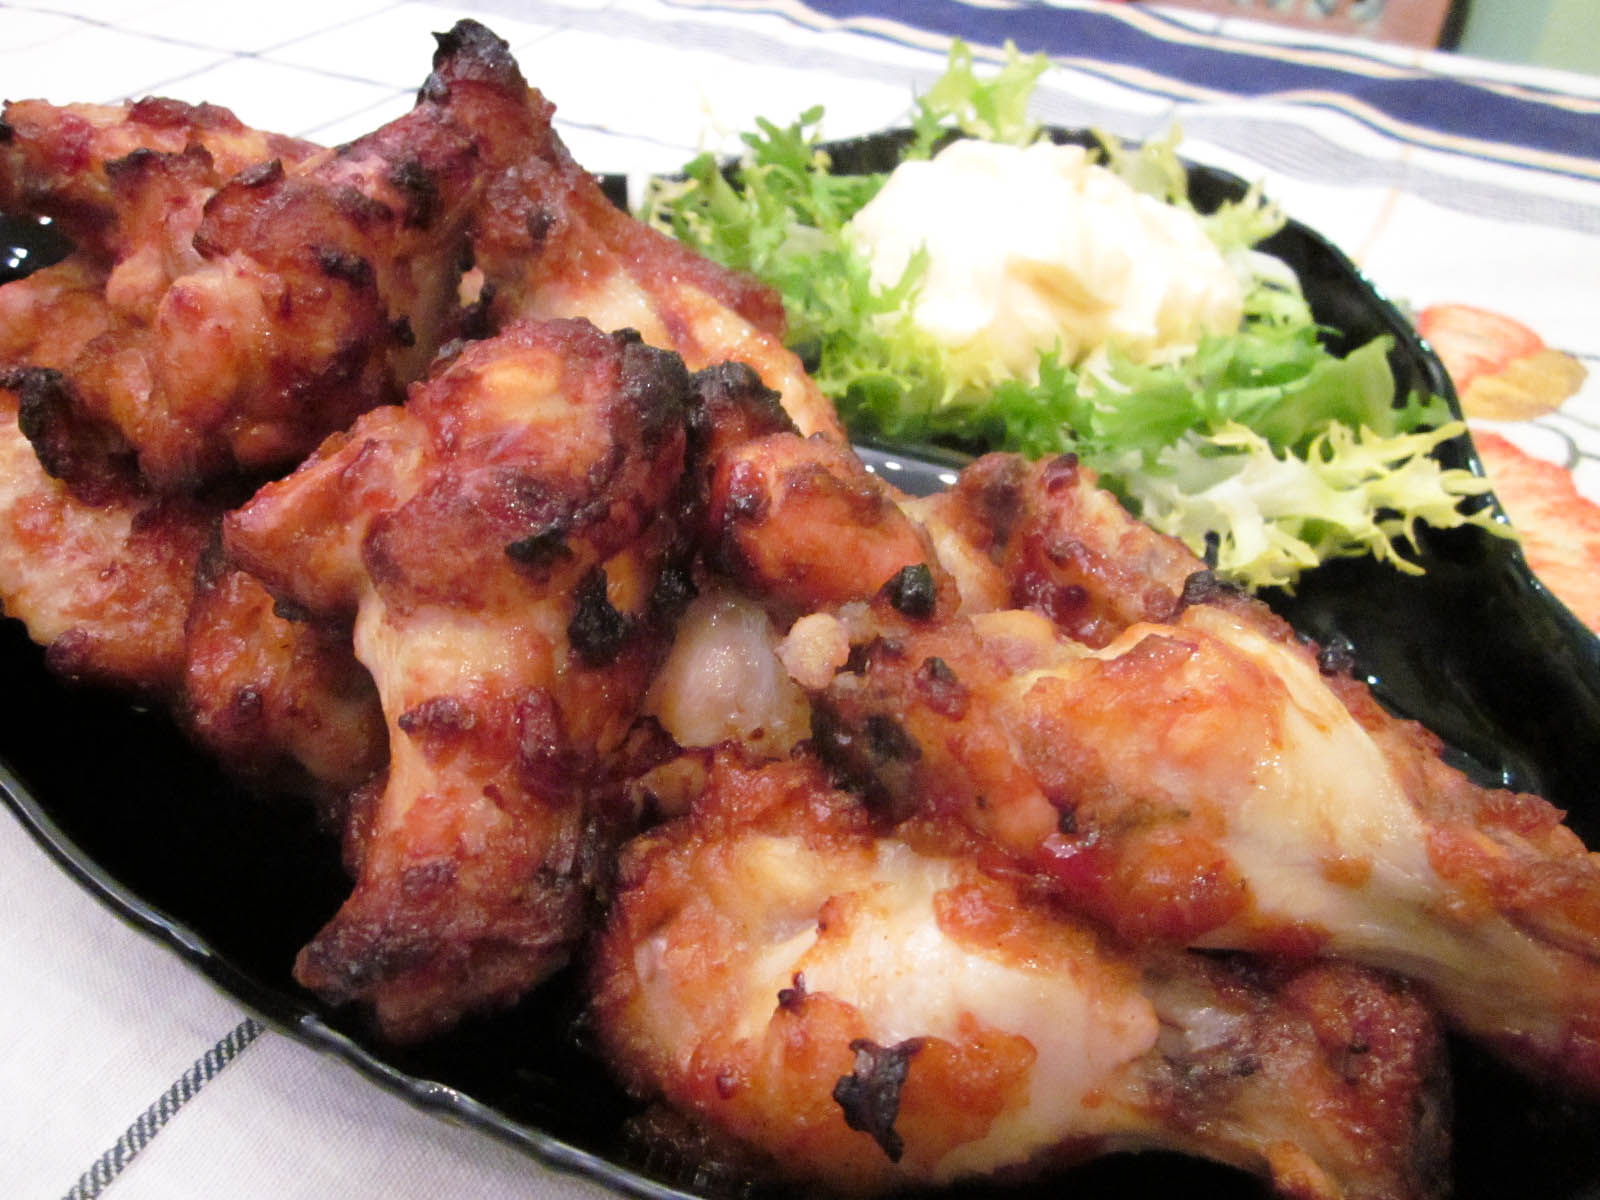 278883724036771289003862232709 Red hot Thai sauce chicken wings - 19979372023375638622329052600929702 - DolceSalato  R R ¬ ë©')µ ‰¬ 